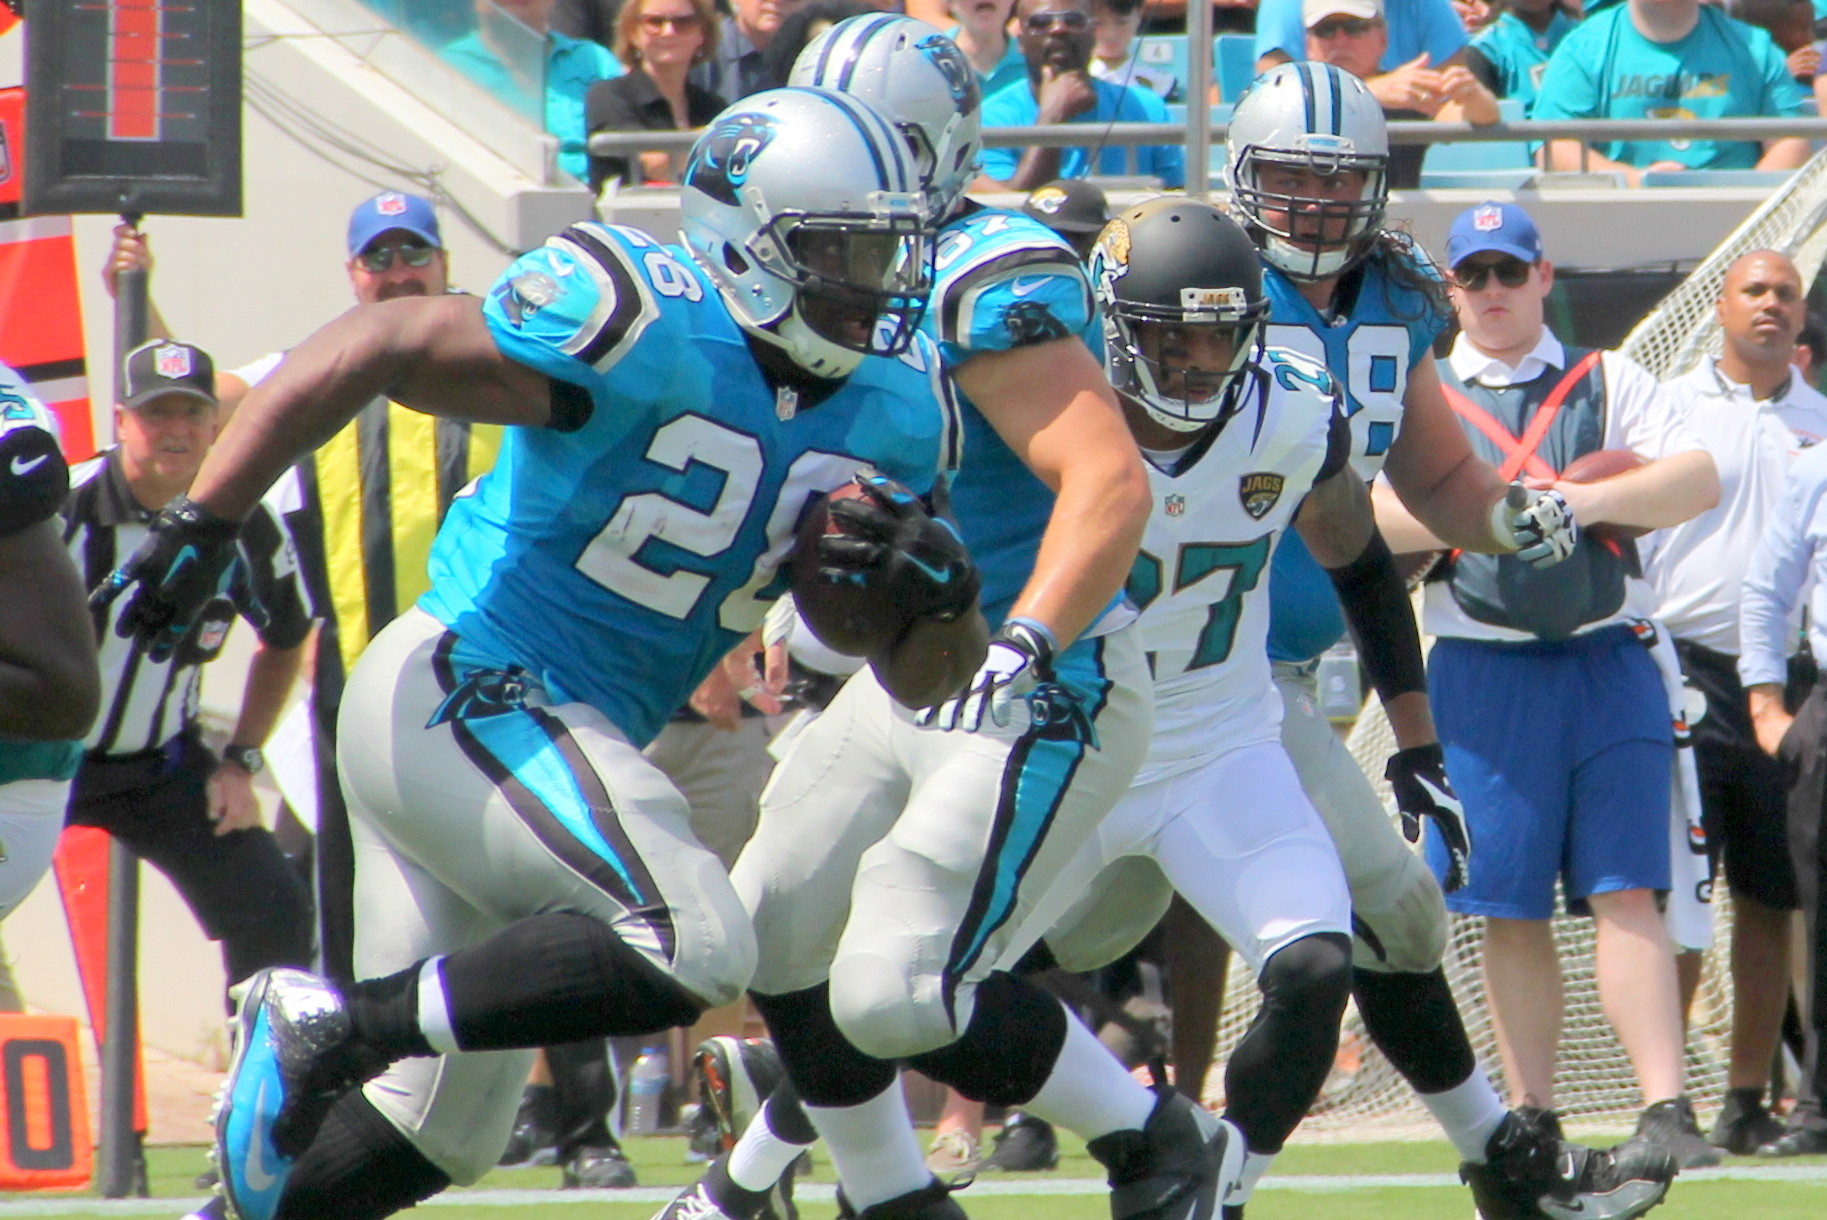 Carolina running back Jonathan Stewart bursts up the middle for a 22-yard gain against the Jaguars in the Panthers’ 20-9 win Sunday.